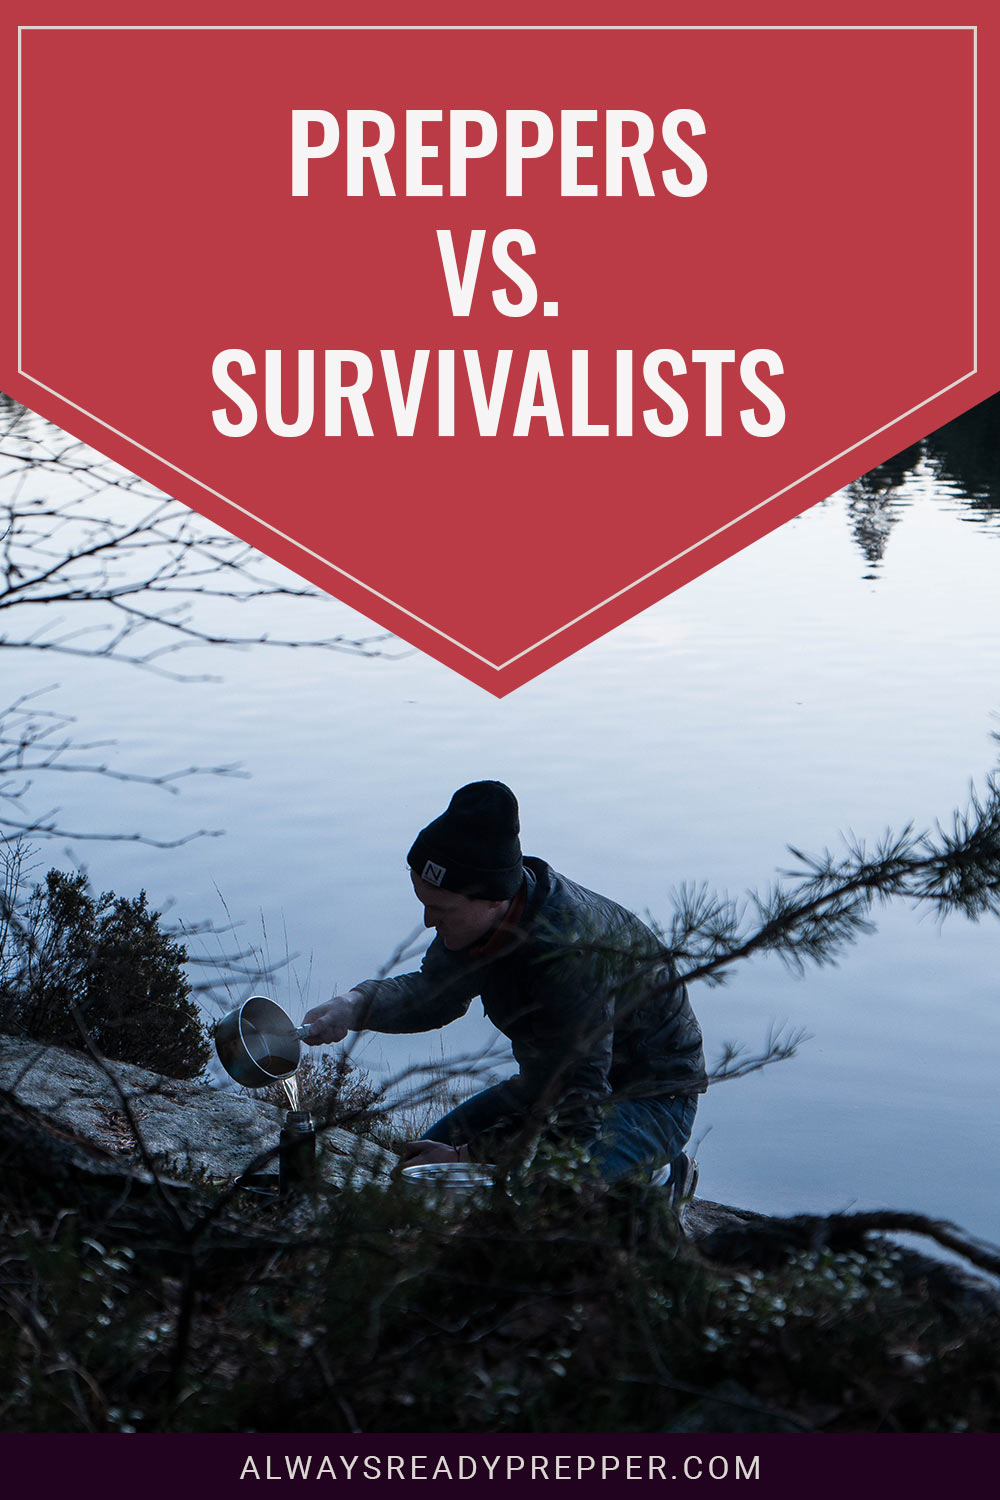 Man pouring boiled water in a bottle near a lake - Preppers vs. Survivalists